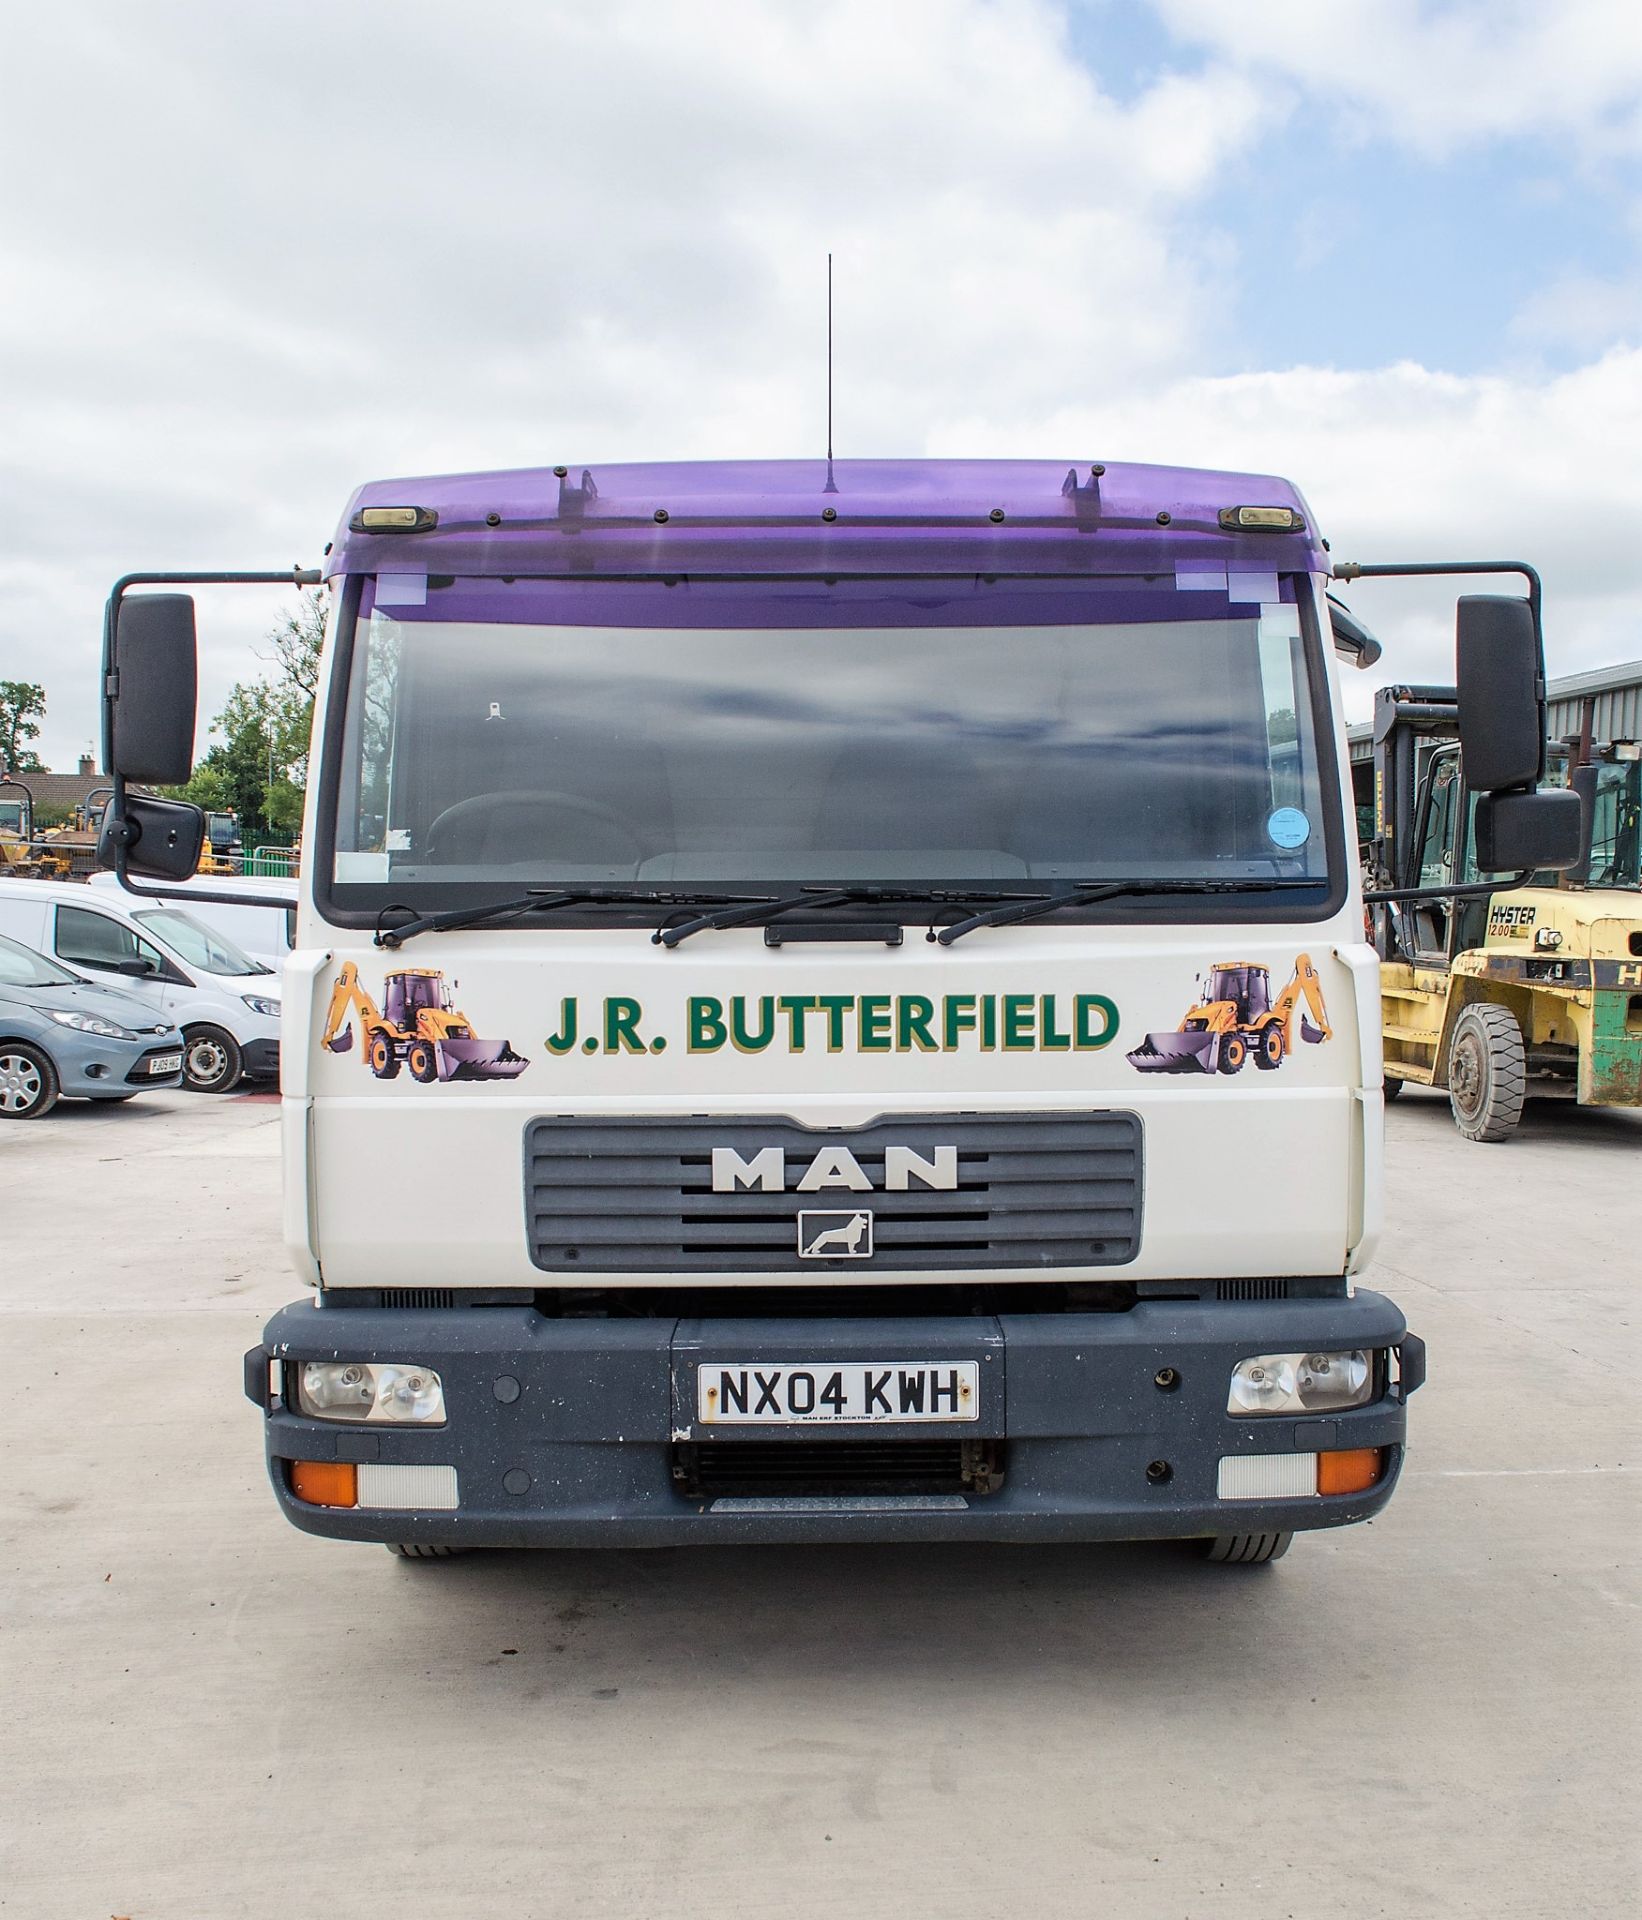 MAN LE8.180 4 x 2 7.5 tonne beaver tail plant lorry  Registration Number: NX04 KWH Date of - Image 5 of 20